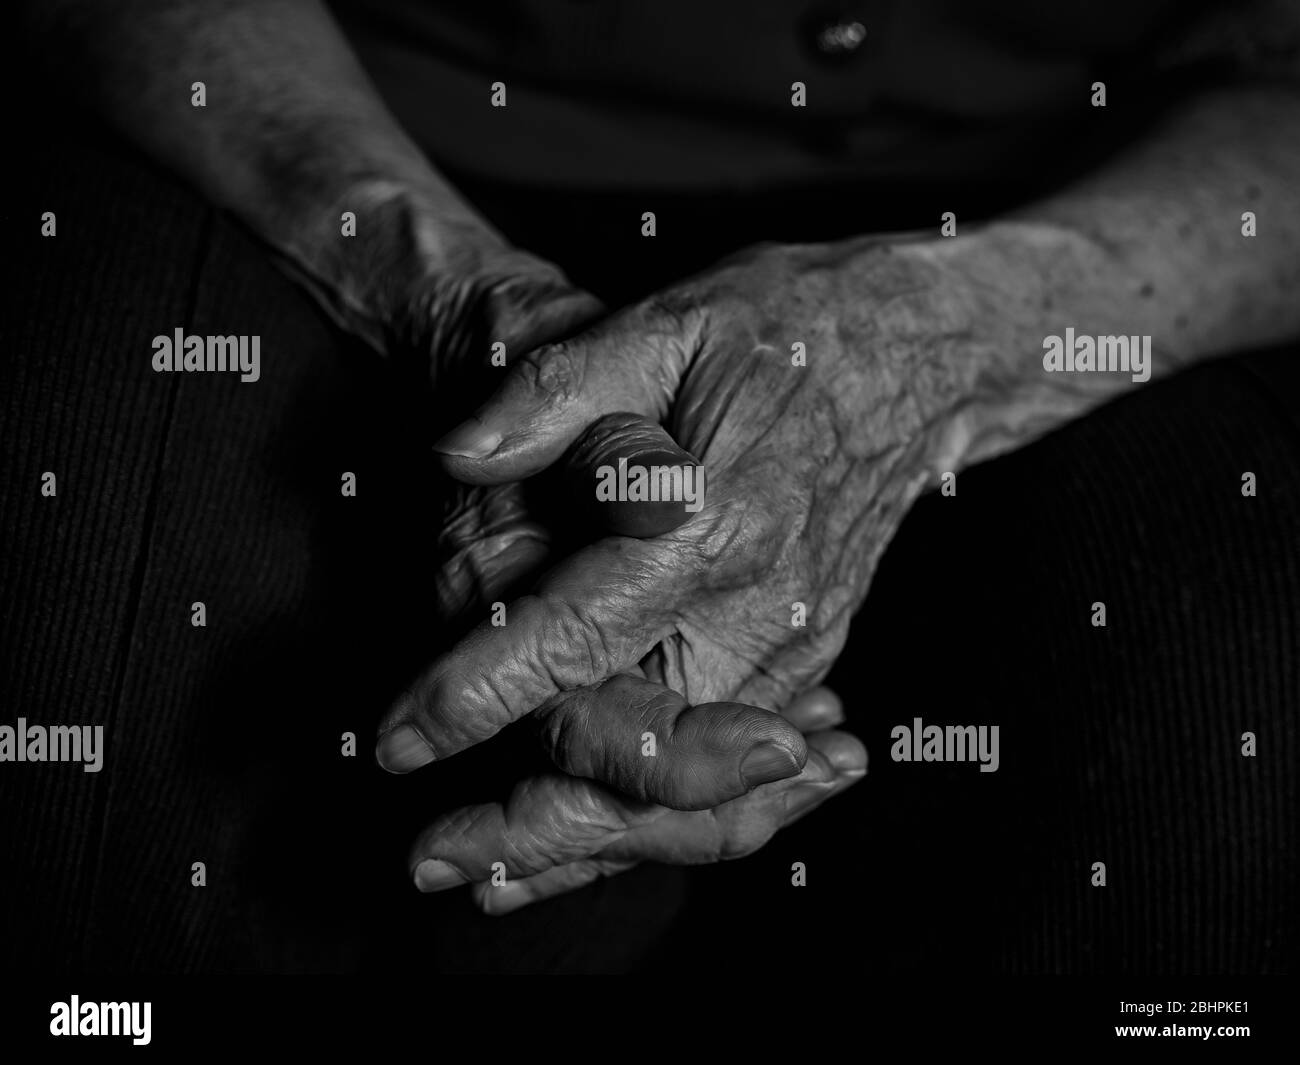 Elderly woman folded her hands on her knees. Low key black and white image Stock Photo